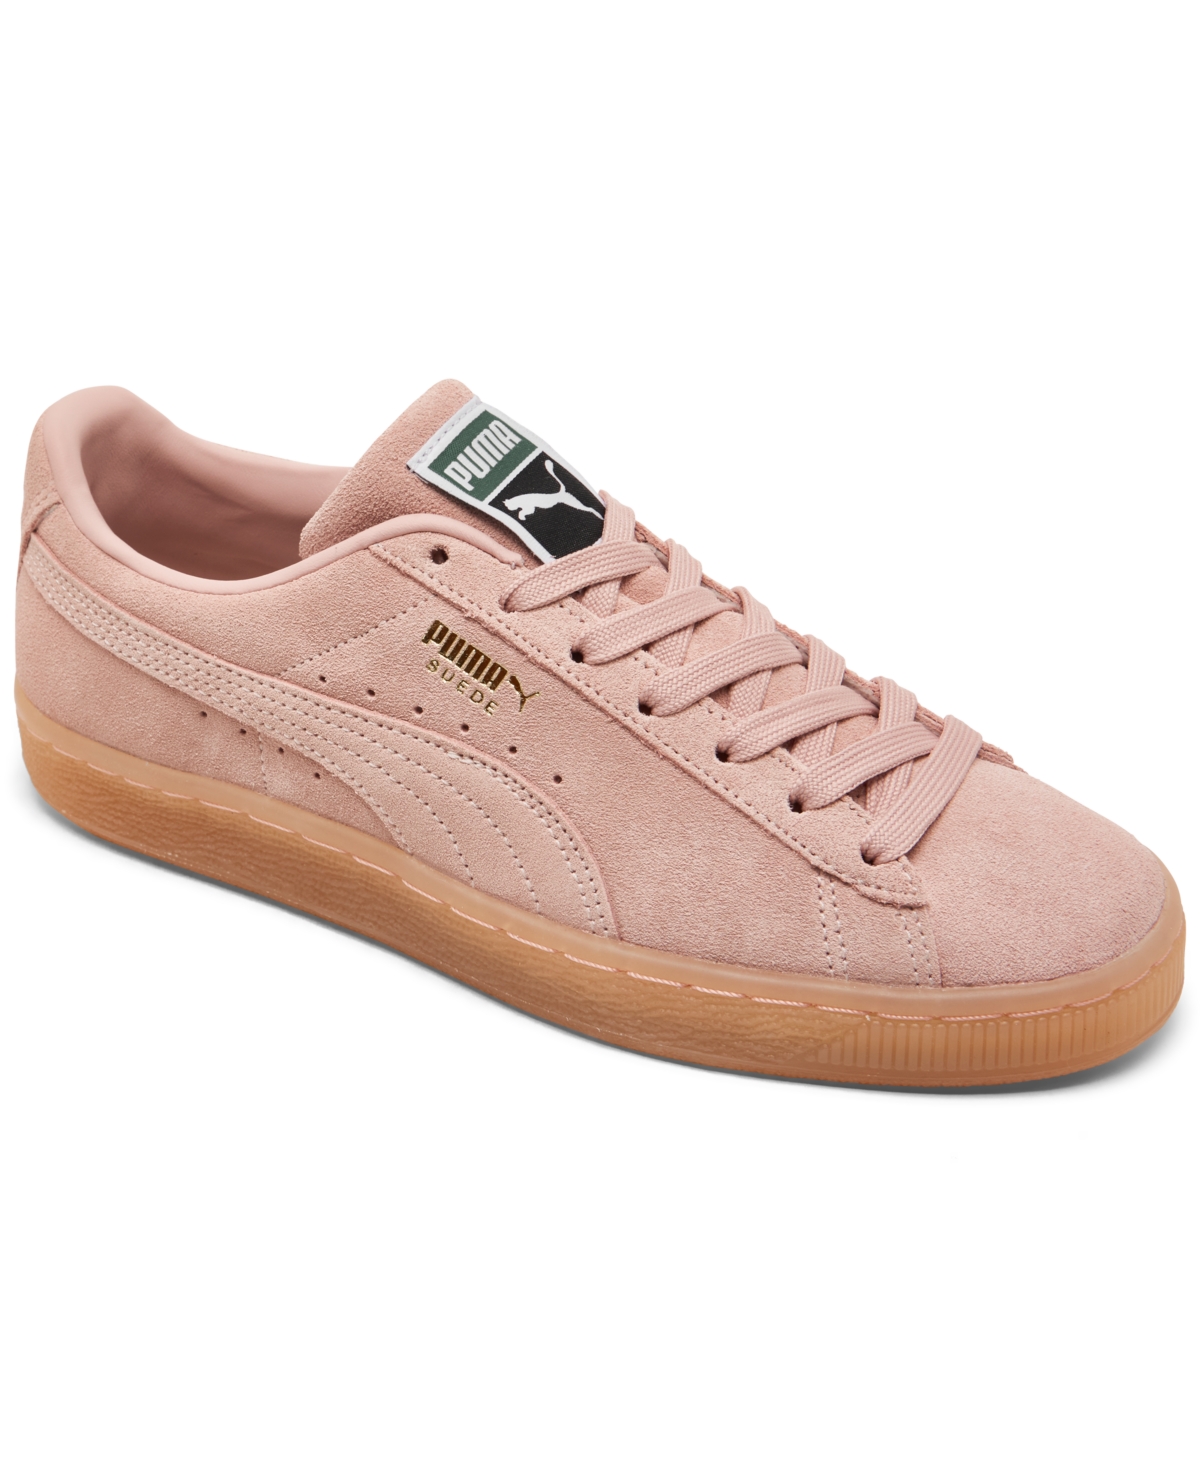 PUMA WOMEN'S SUEDE CLASSIC CASUAL SNEAKERS FROM FINISH LINE